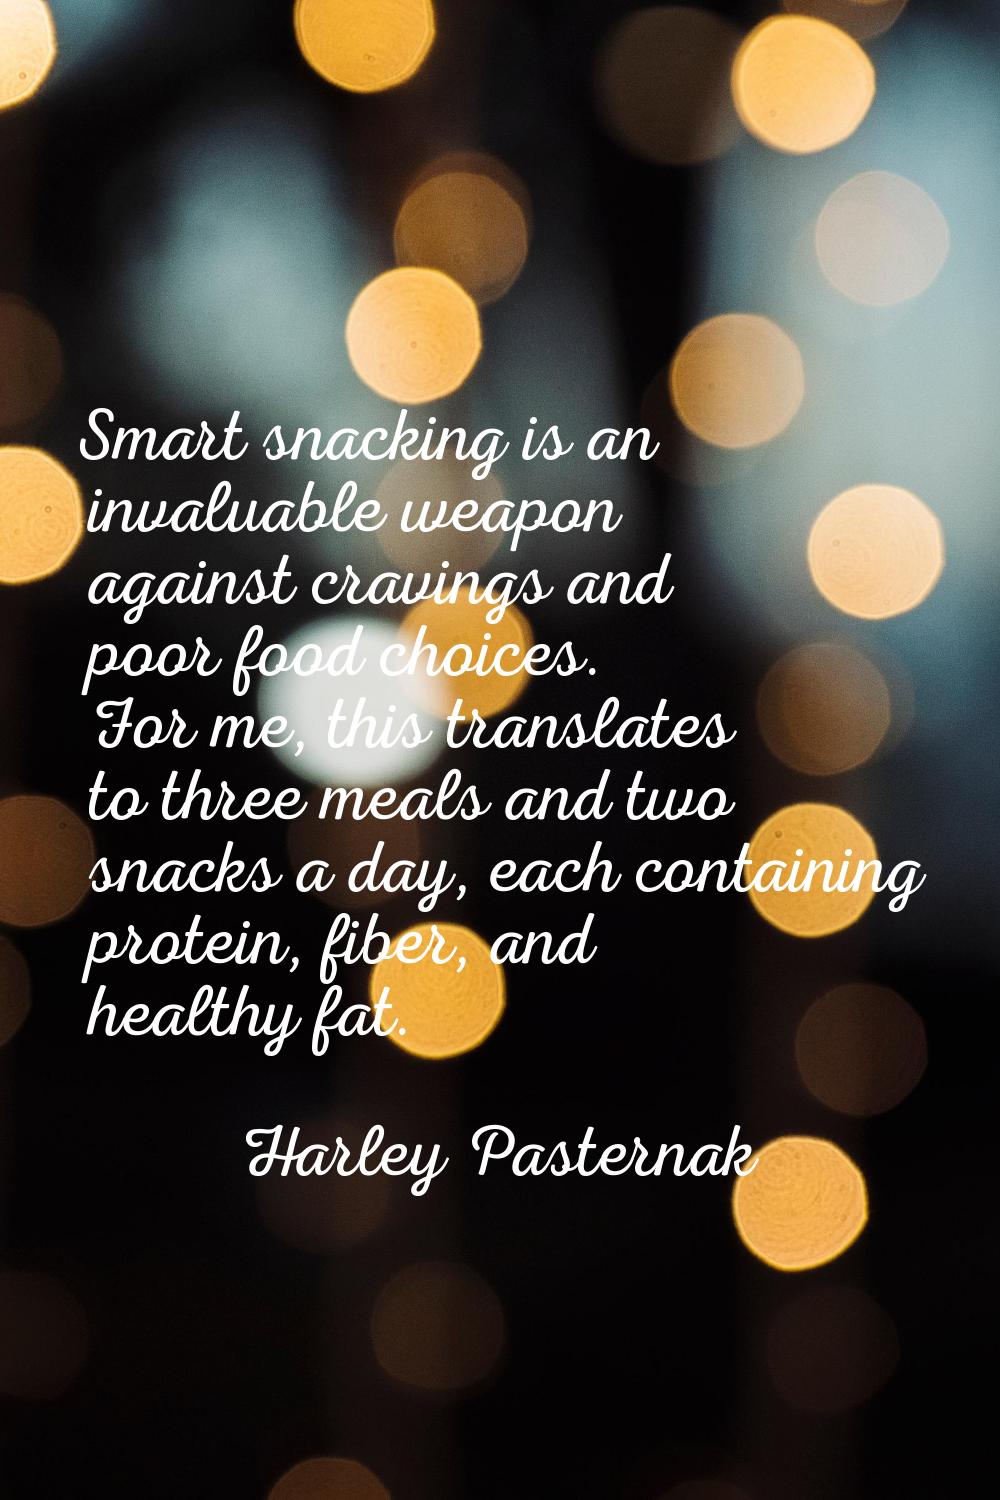 Smart snacking is an invaluable weapon against cravings and poor food choices. For me, this transla